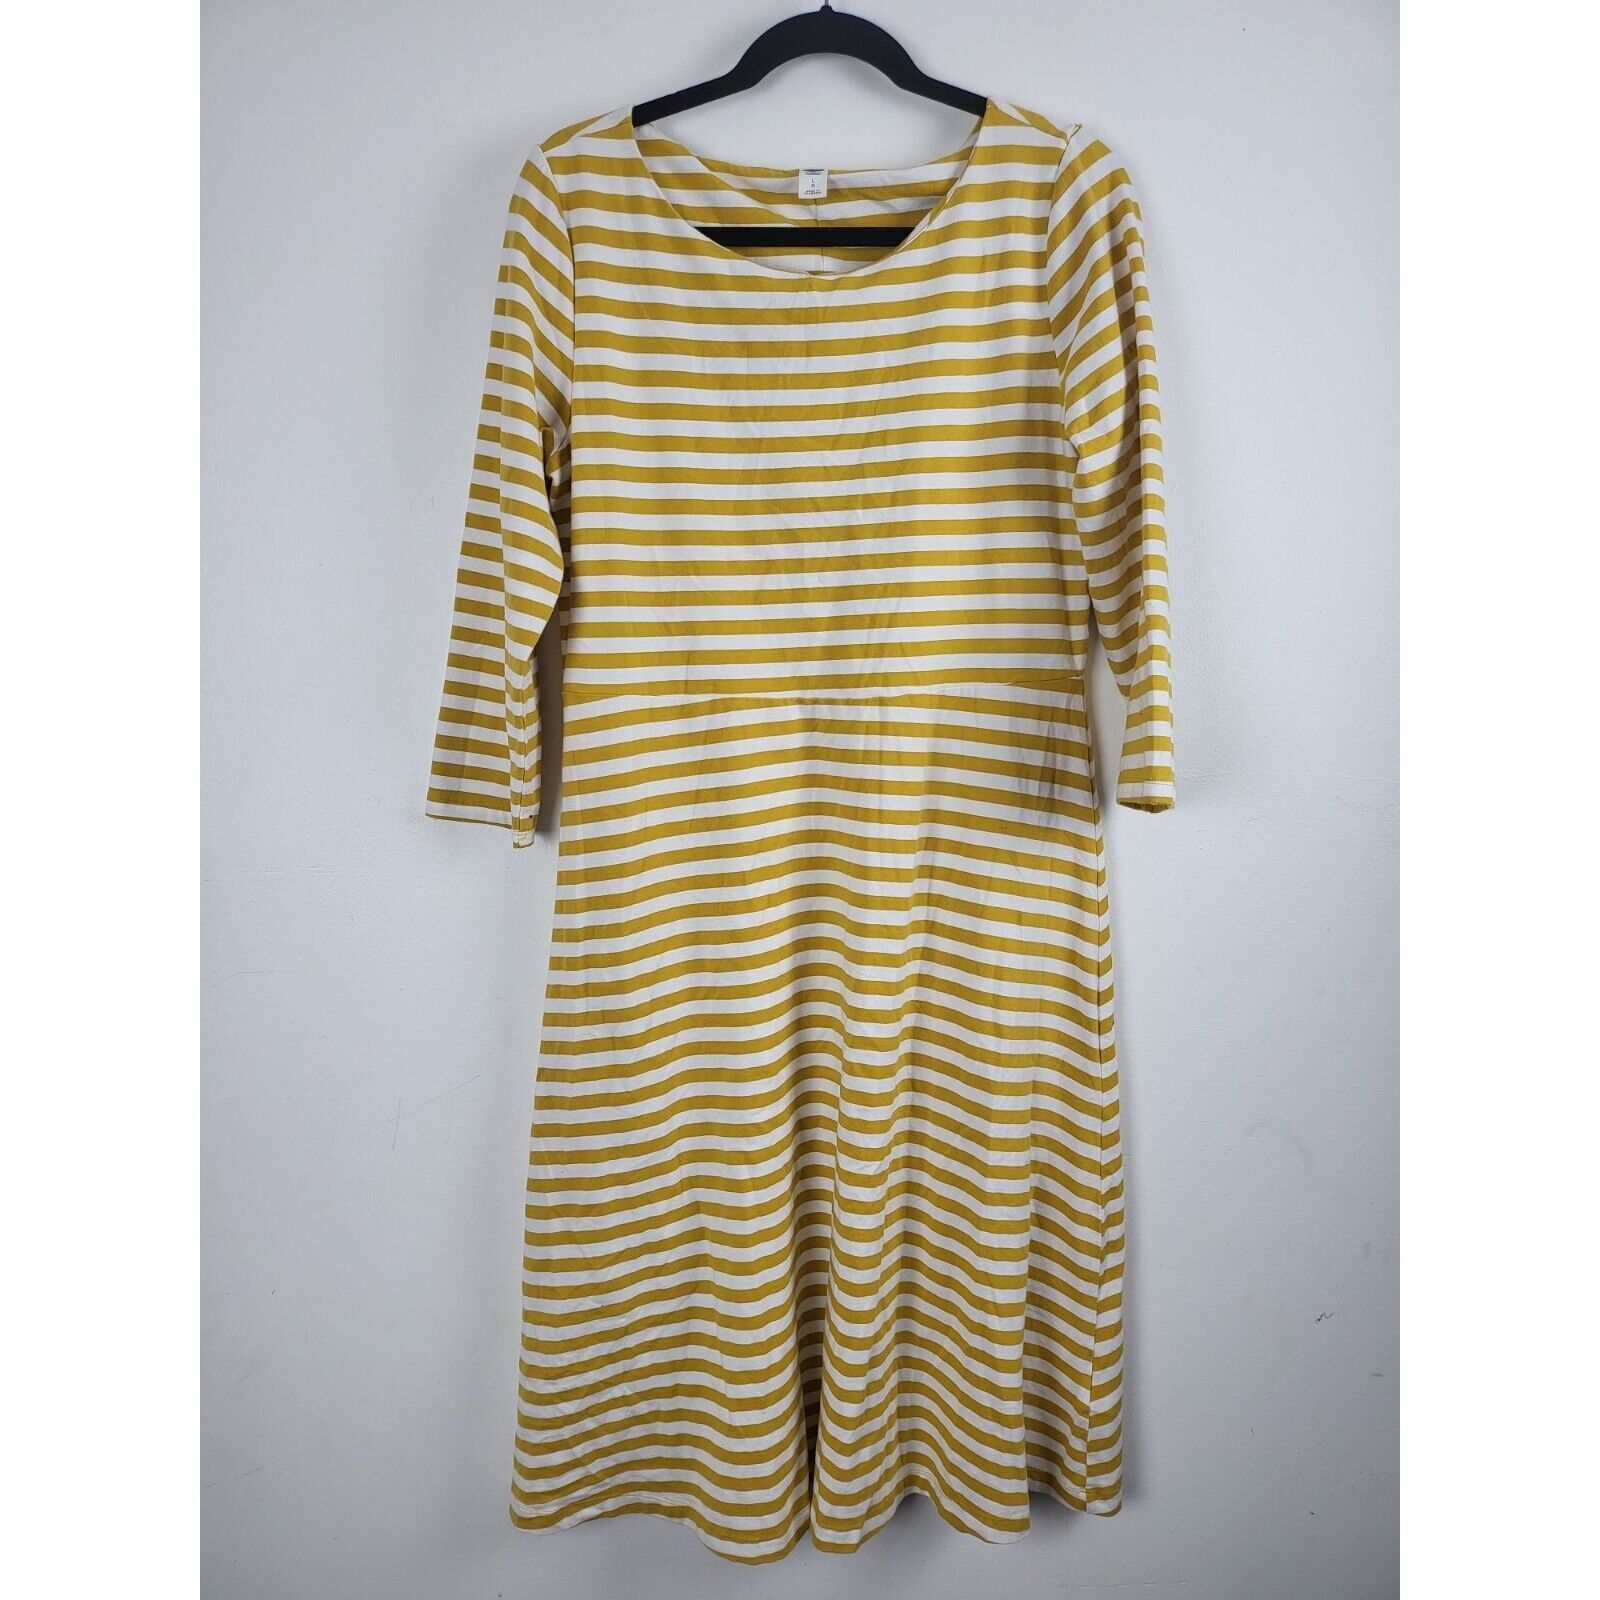 Primary image for Old Navy Long Sleeve Dress Large Womens Mustard White Striped Knee Length Crew